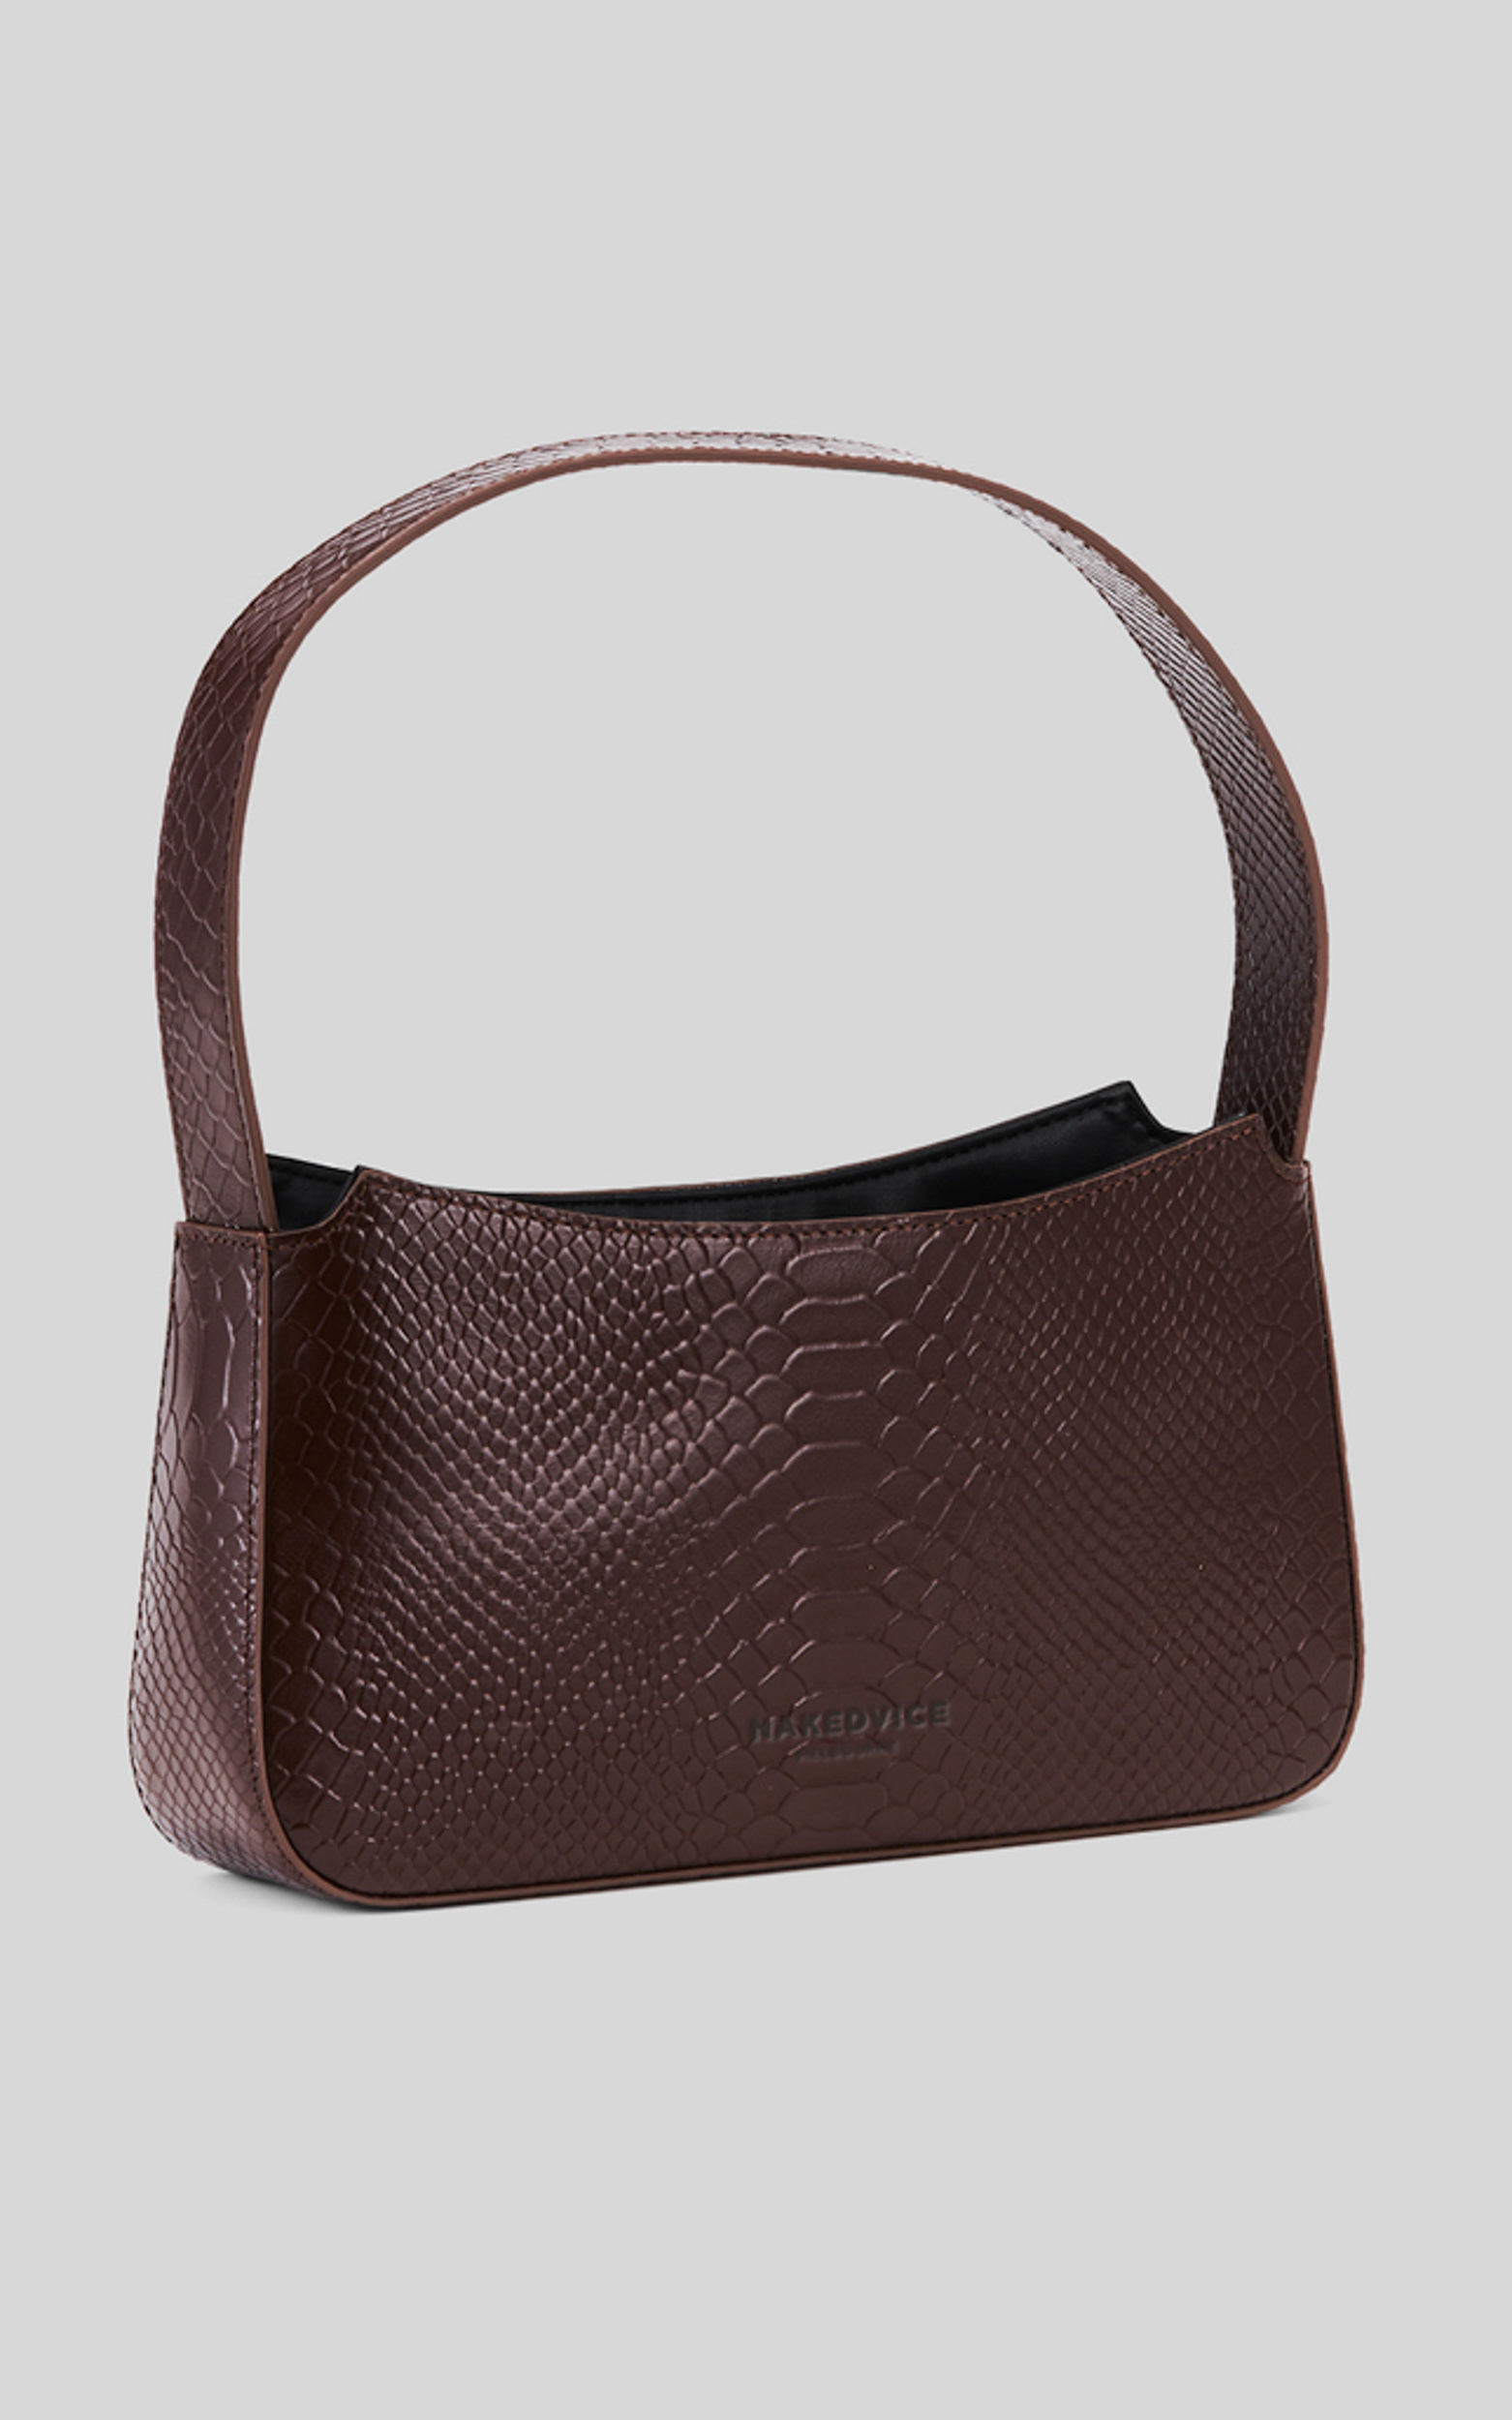 NAKEDVICE - THE CAMELIA BAG in COCOA/SILVER - NoSize, BRN1, hi-res image number null